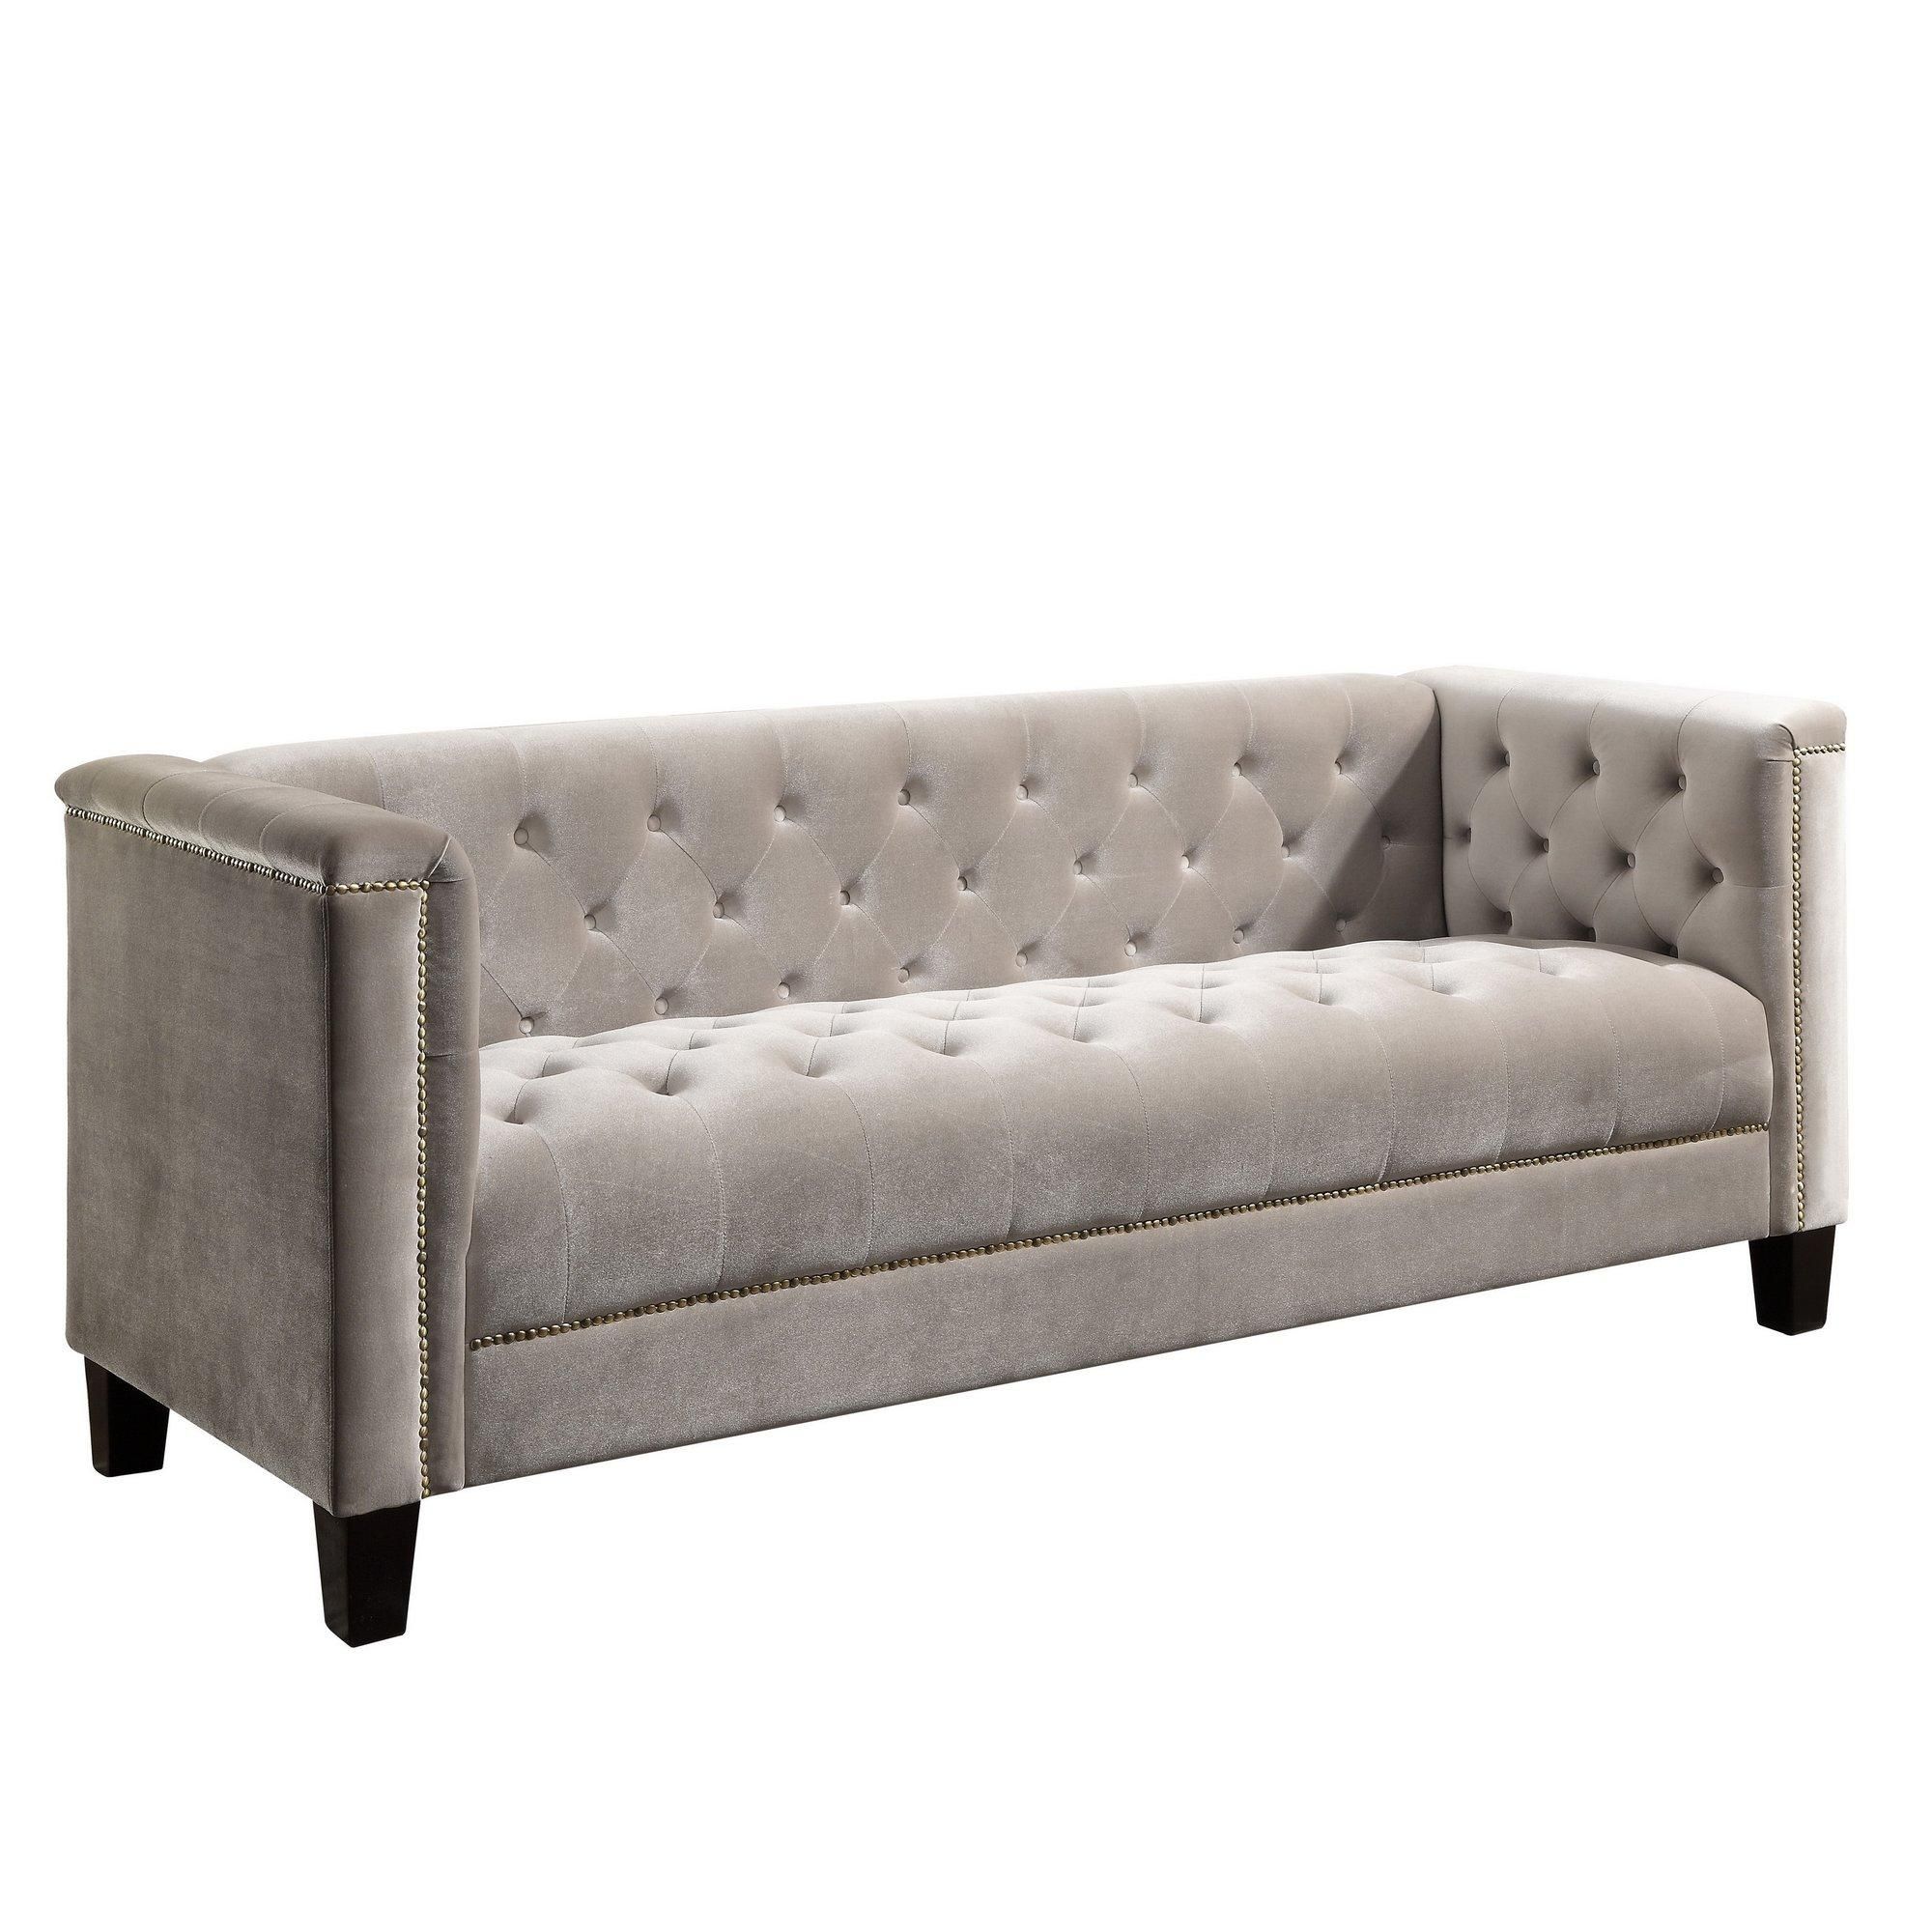 Dowe Tufted Chesterfield Sofa & Reviews | Allmodern Inside Small Chesterfield Sofas (View 20 of 20)